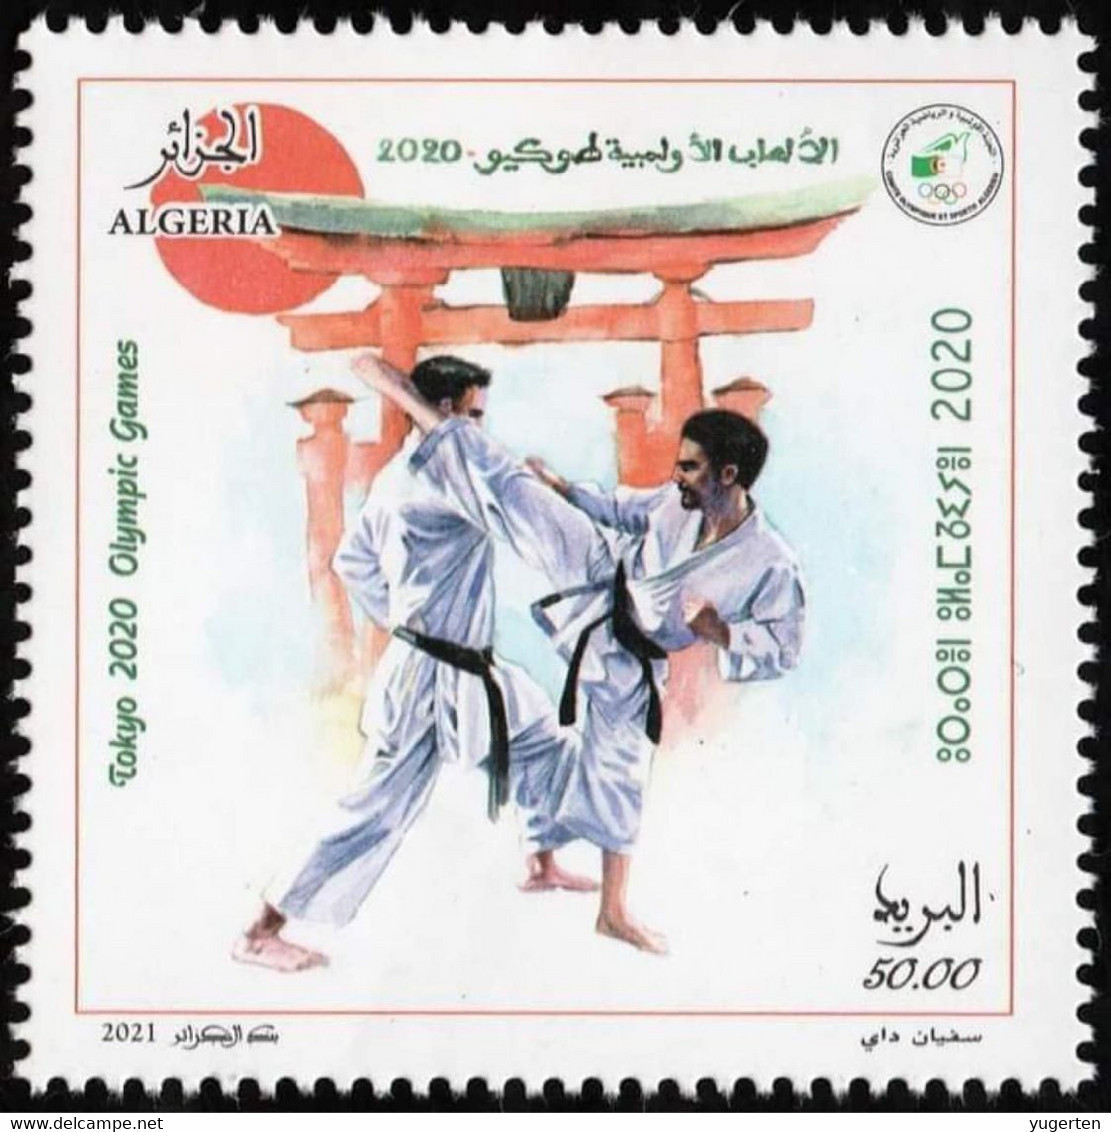 ALGERIA 2021 - 1 V - MNH - Karate - Olympic Games Tokyo JO Olympics Olympische Spiele Jeux Olympiques Japan - Non Classificati